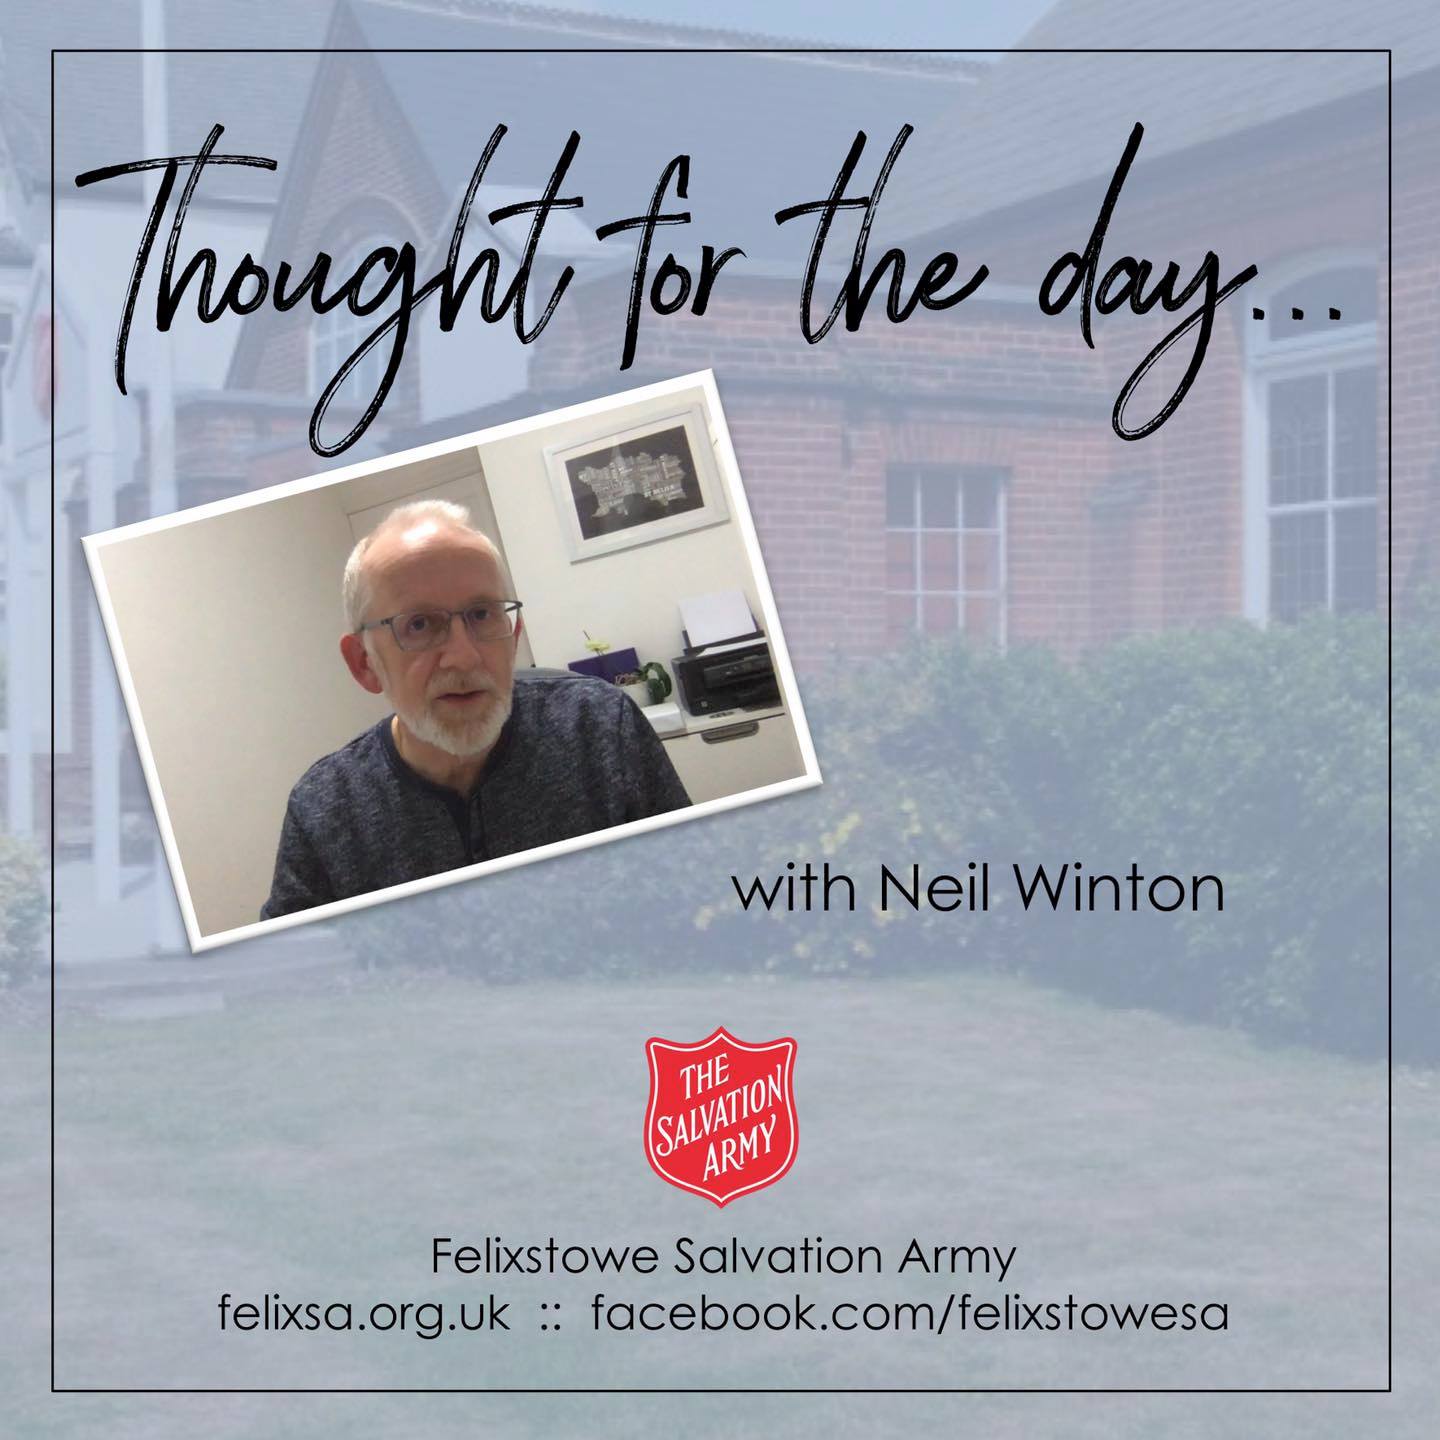 Thought for the Day with Neil Winton